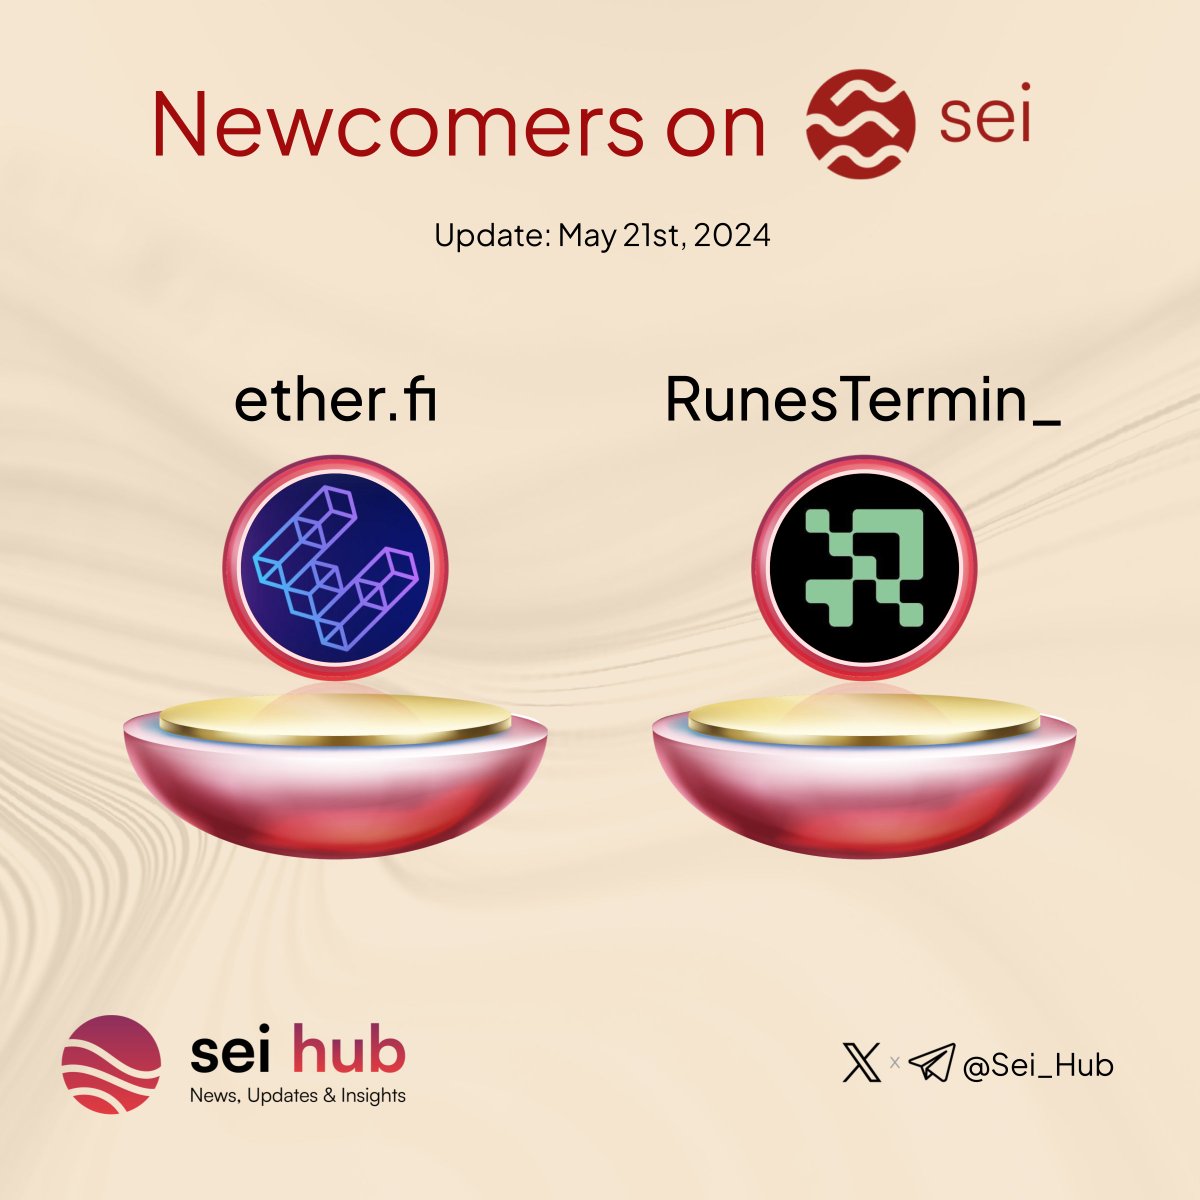 🔴💨 A big welcome to the newest #Seiyans in the #Sei ecosystem! 🚀 Excited for what's ahead with the latest Newcomer: @ether_fi @runes_terminal $SEI #SeiNetwork #DeFi